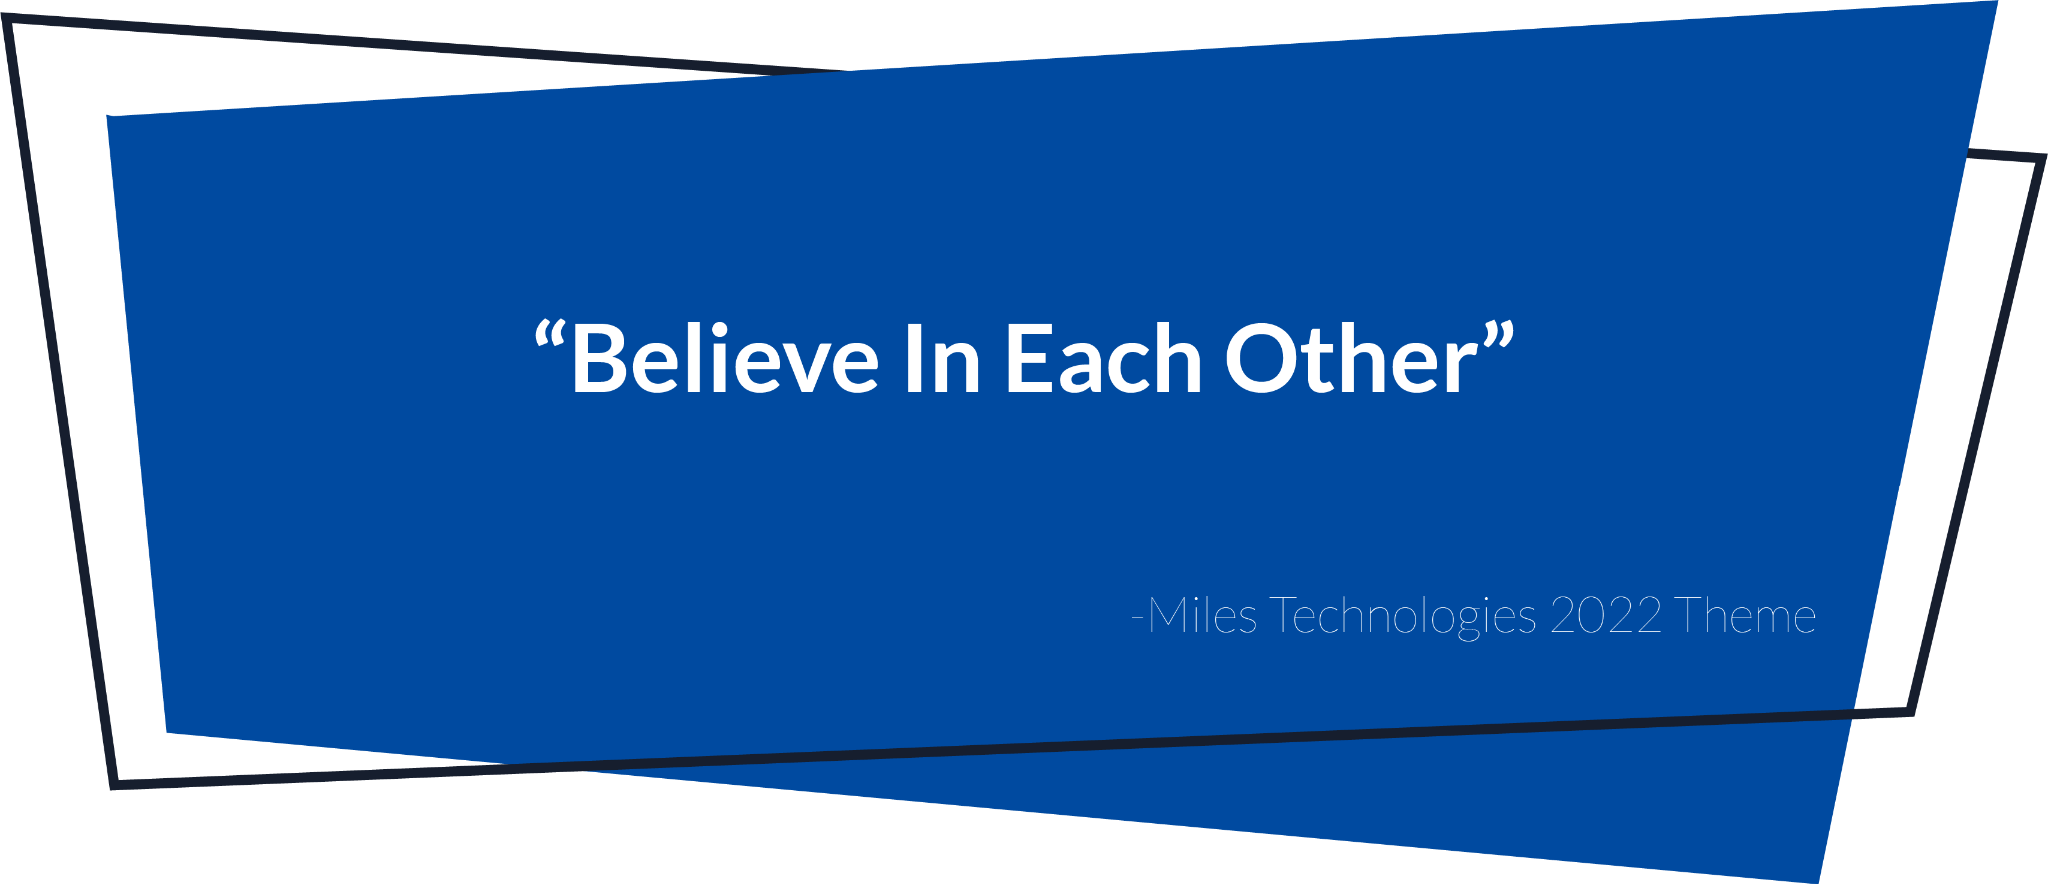 miles-technologies-2022-theme-believe-in-each-other